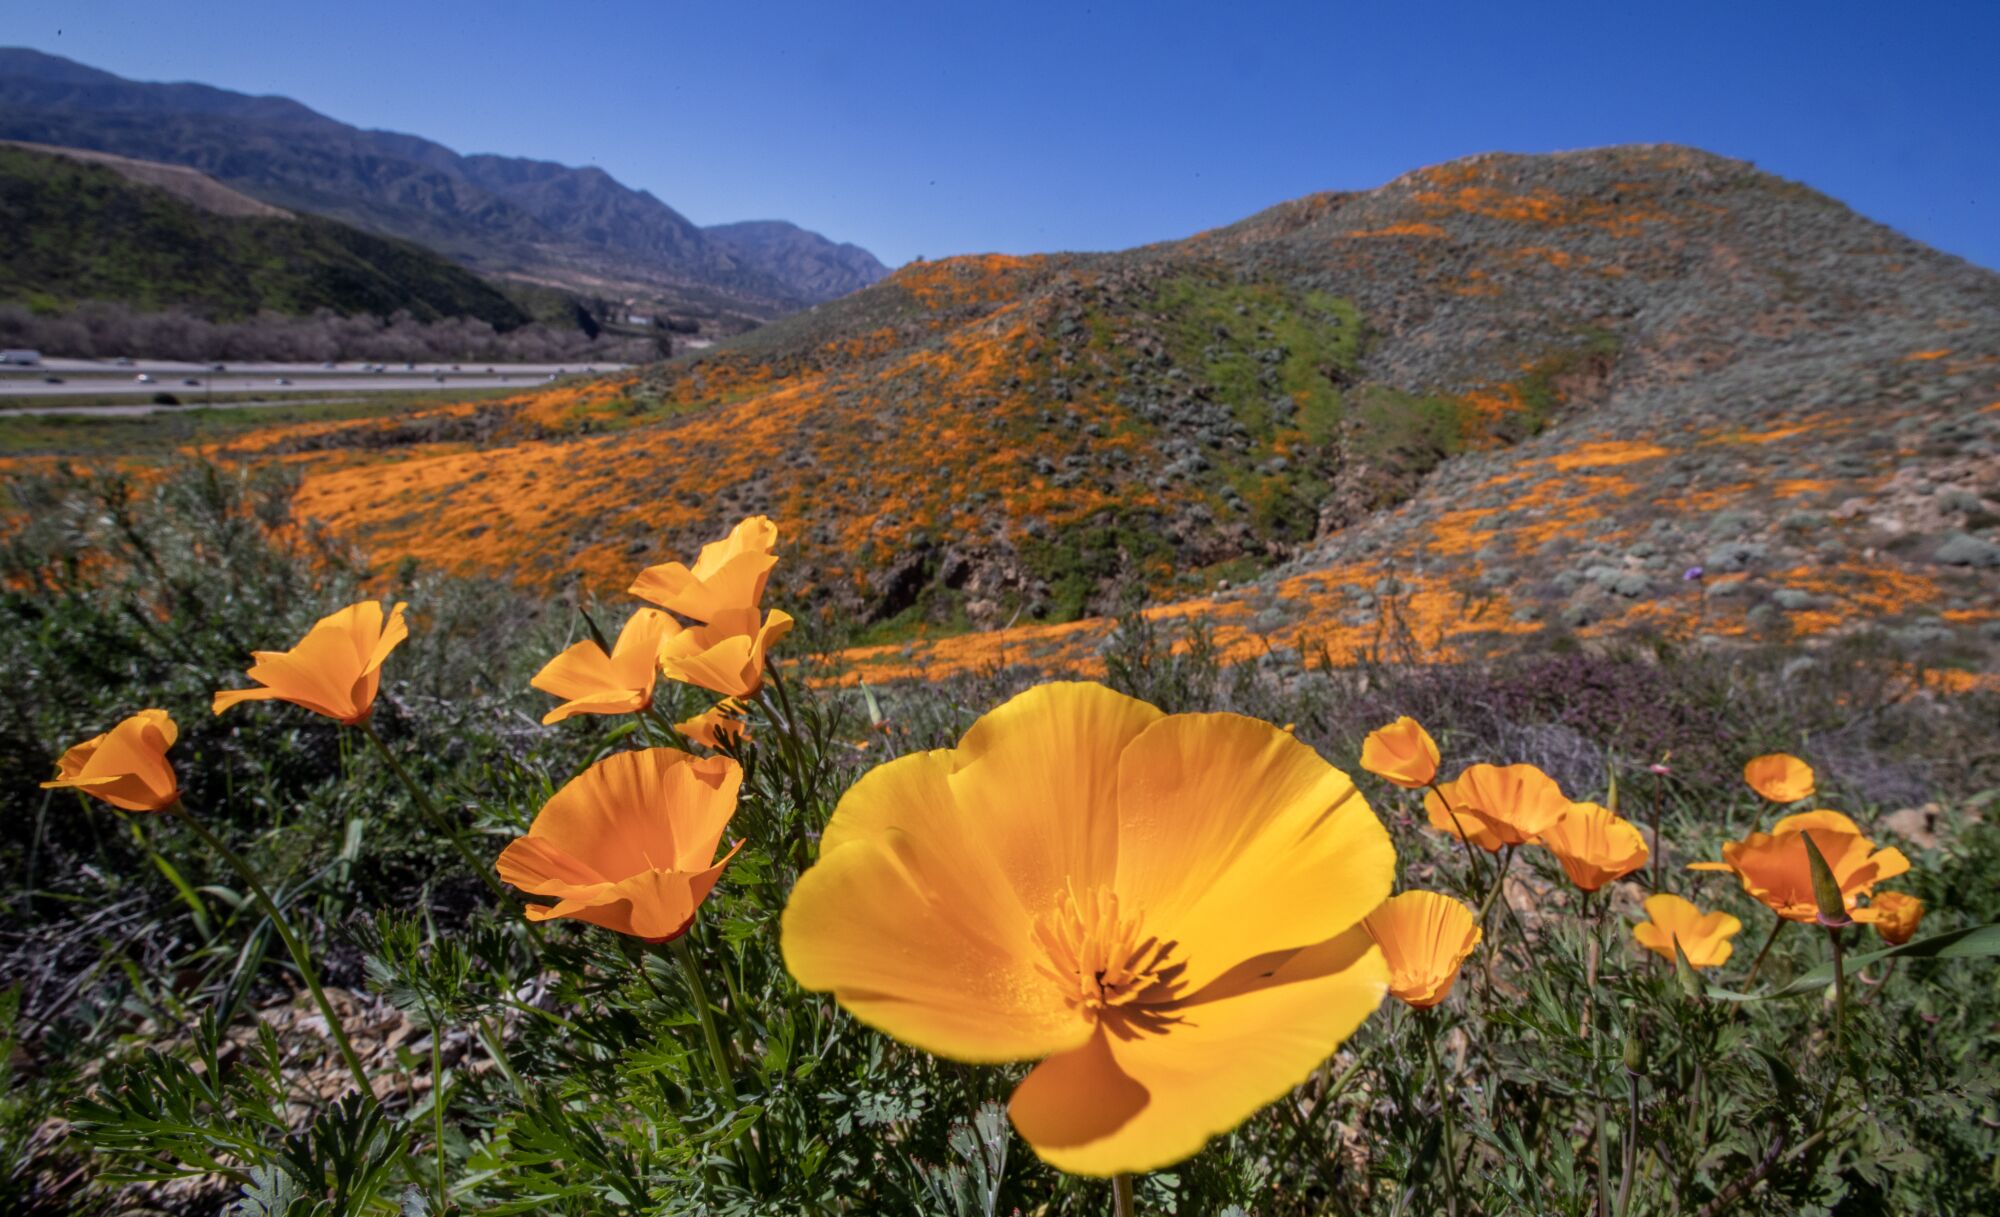 A close-up view of the poppies in Lake Elsinore's Walker Canyon.